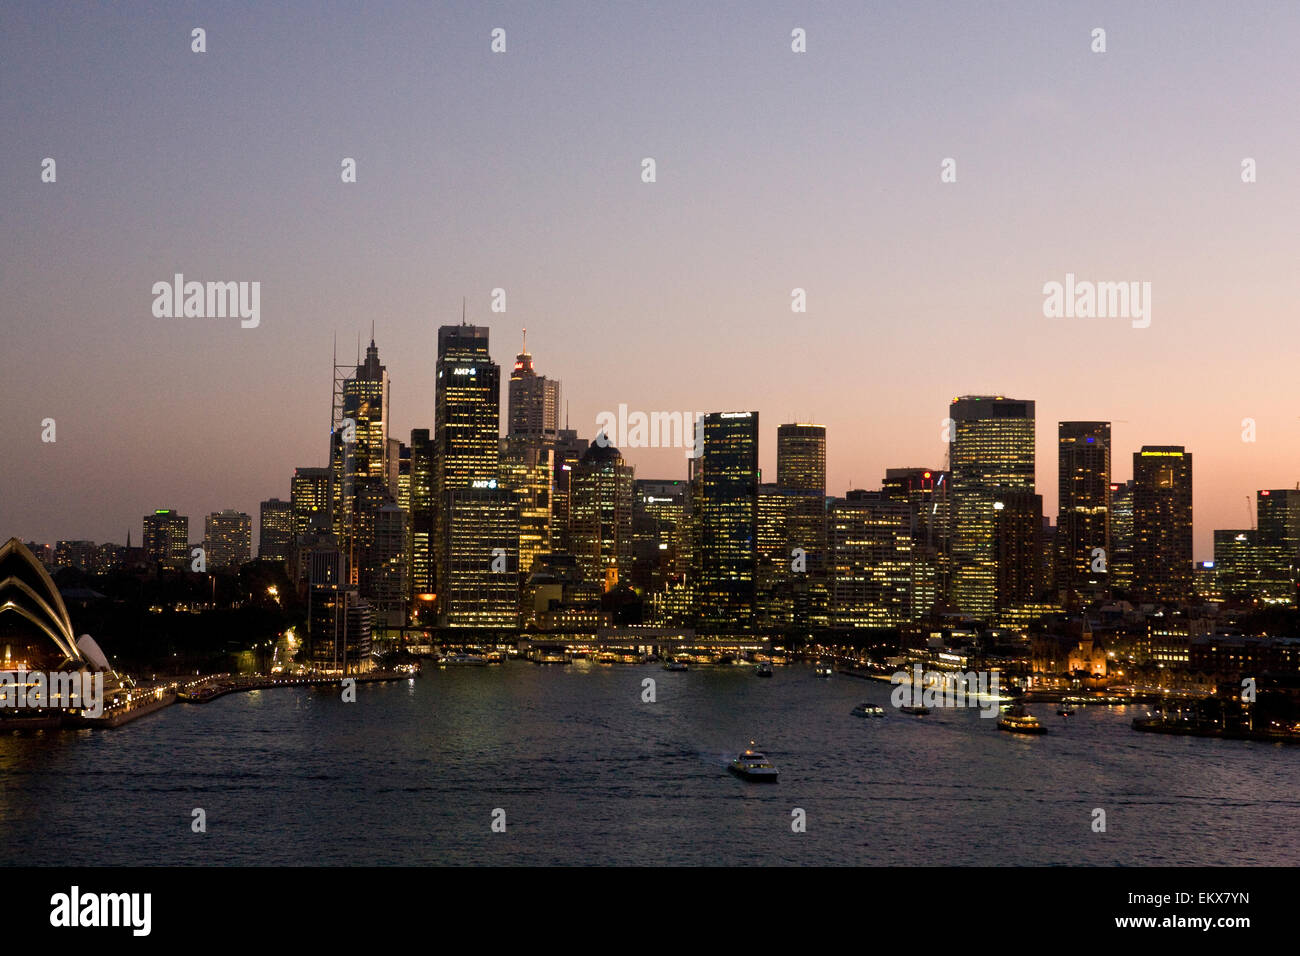 view of Circular Quay, Sydney Harbour, Australia at sunset as day turns to night and the lights come on in the city buildings Stock Photo